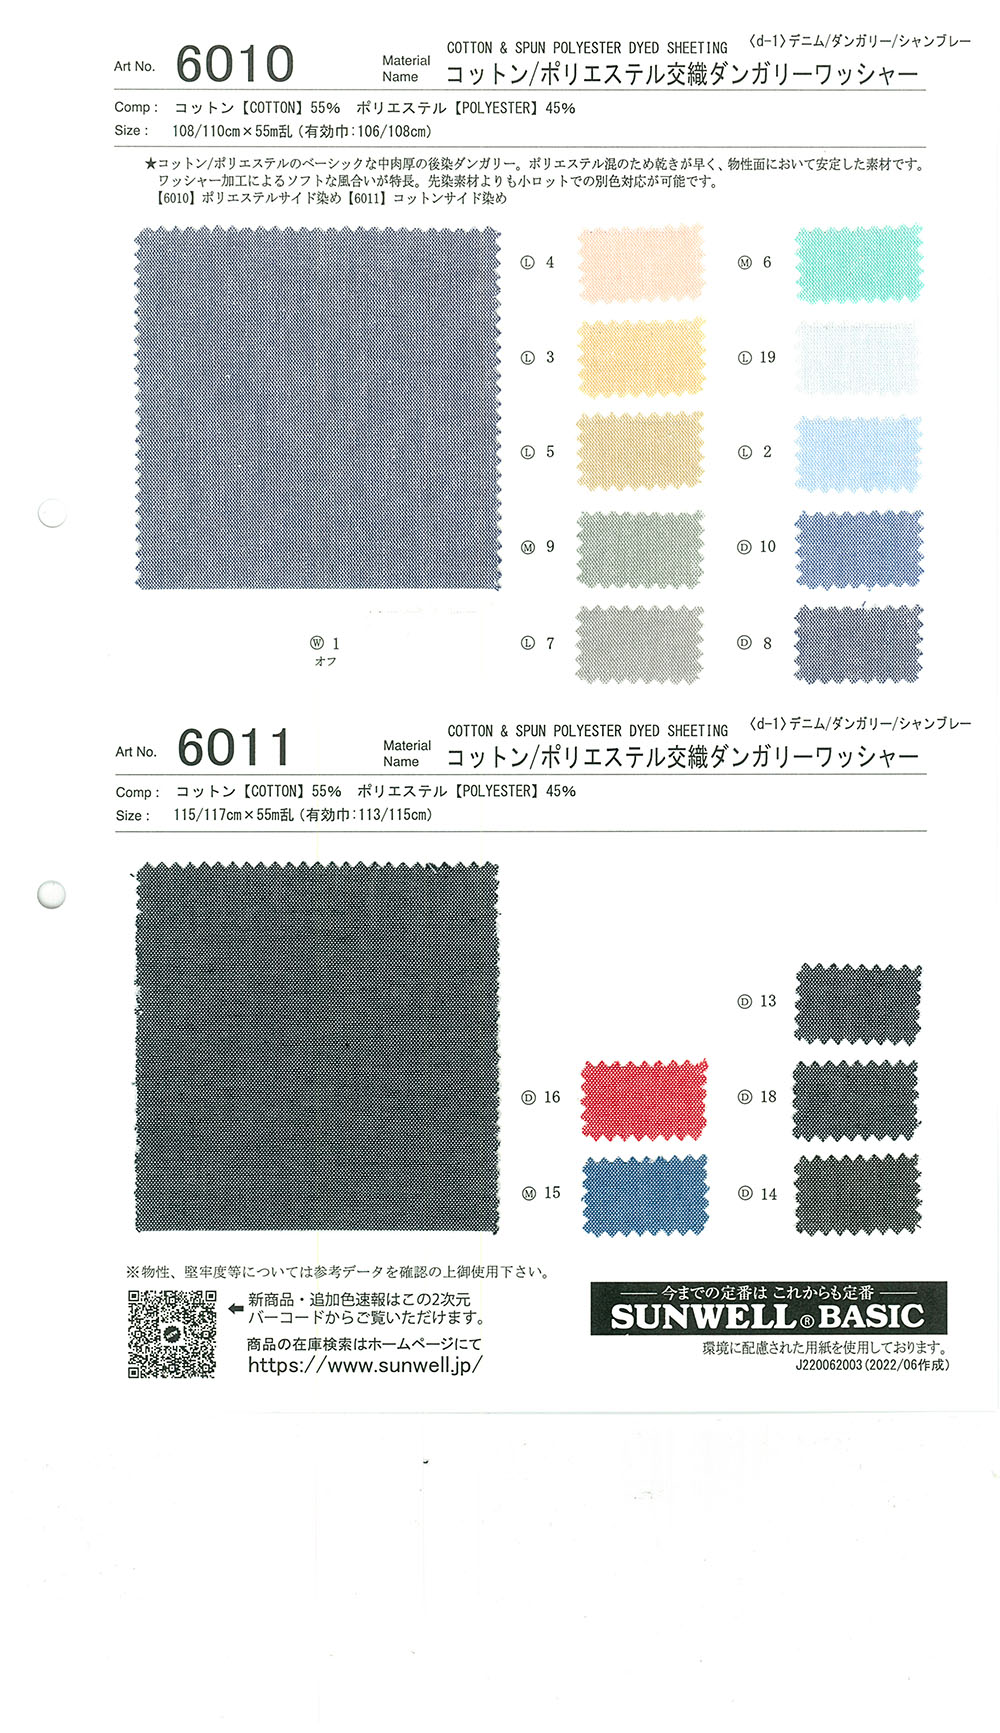 6011 Cotton/Polyester Mixed Weave Dungaree Washer Processing[Textile / Fabric] SUNWELL